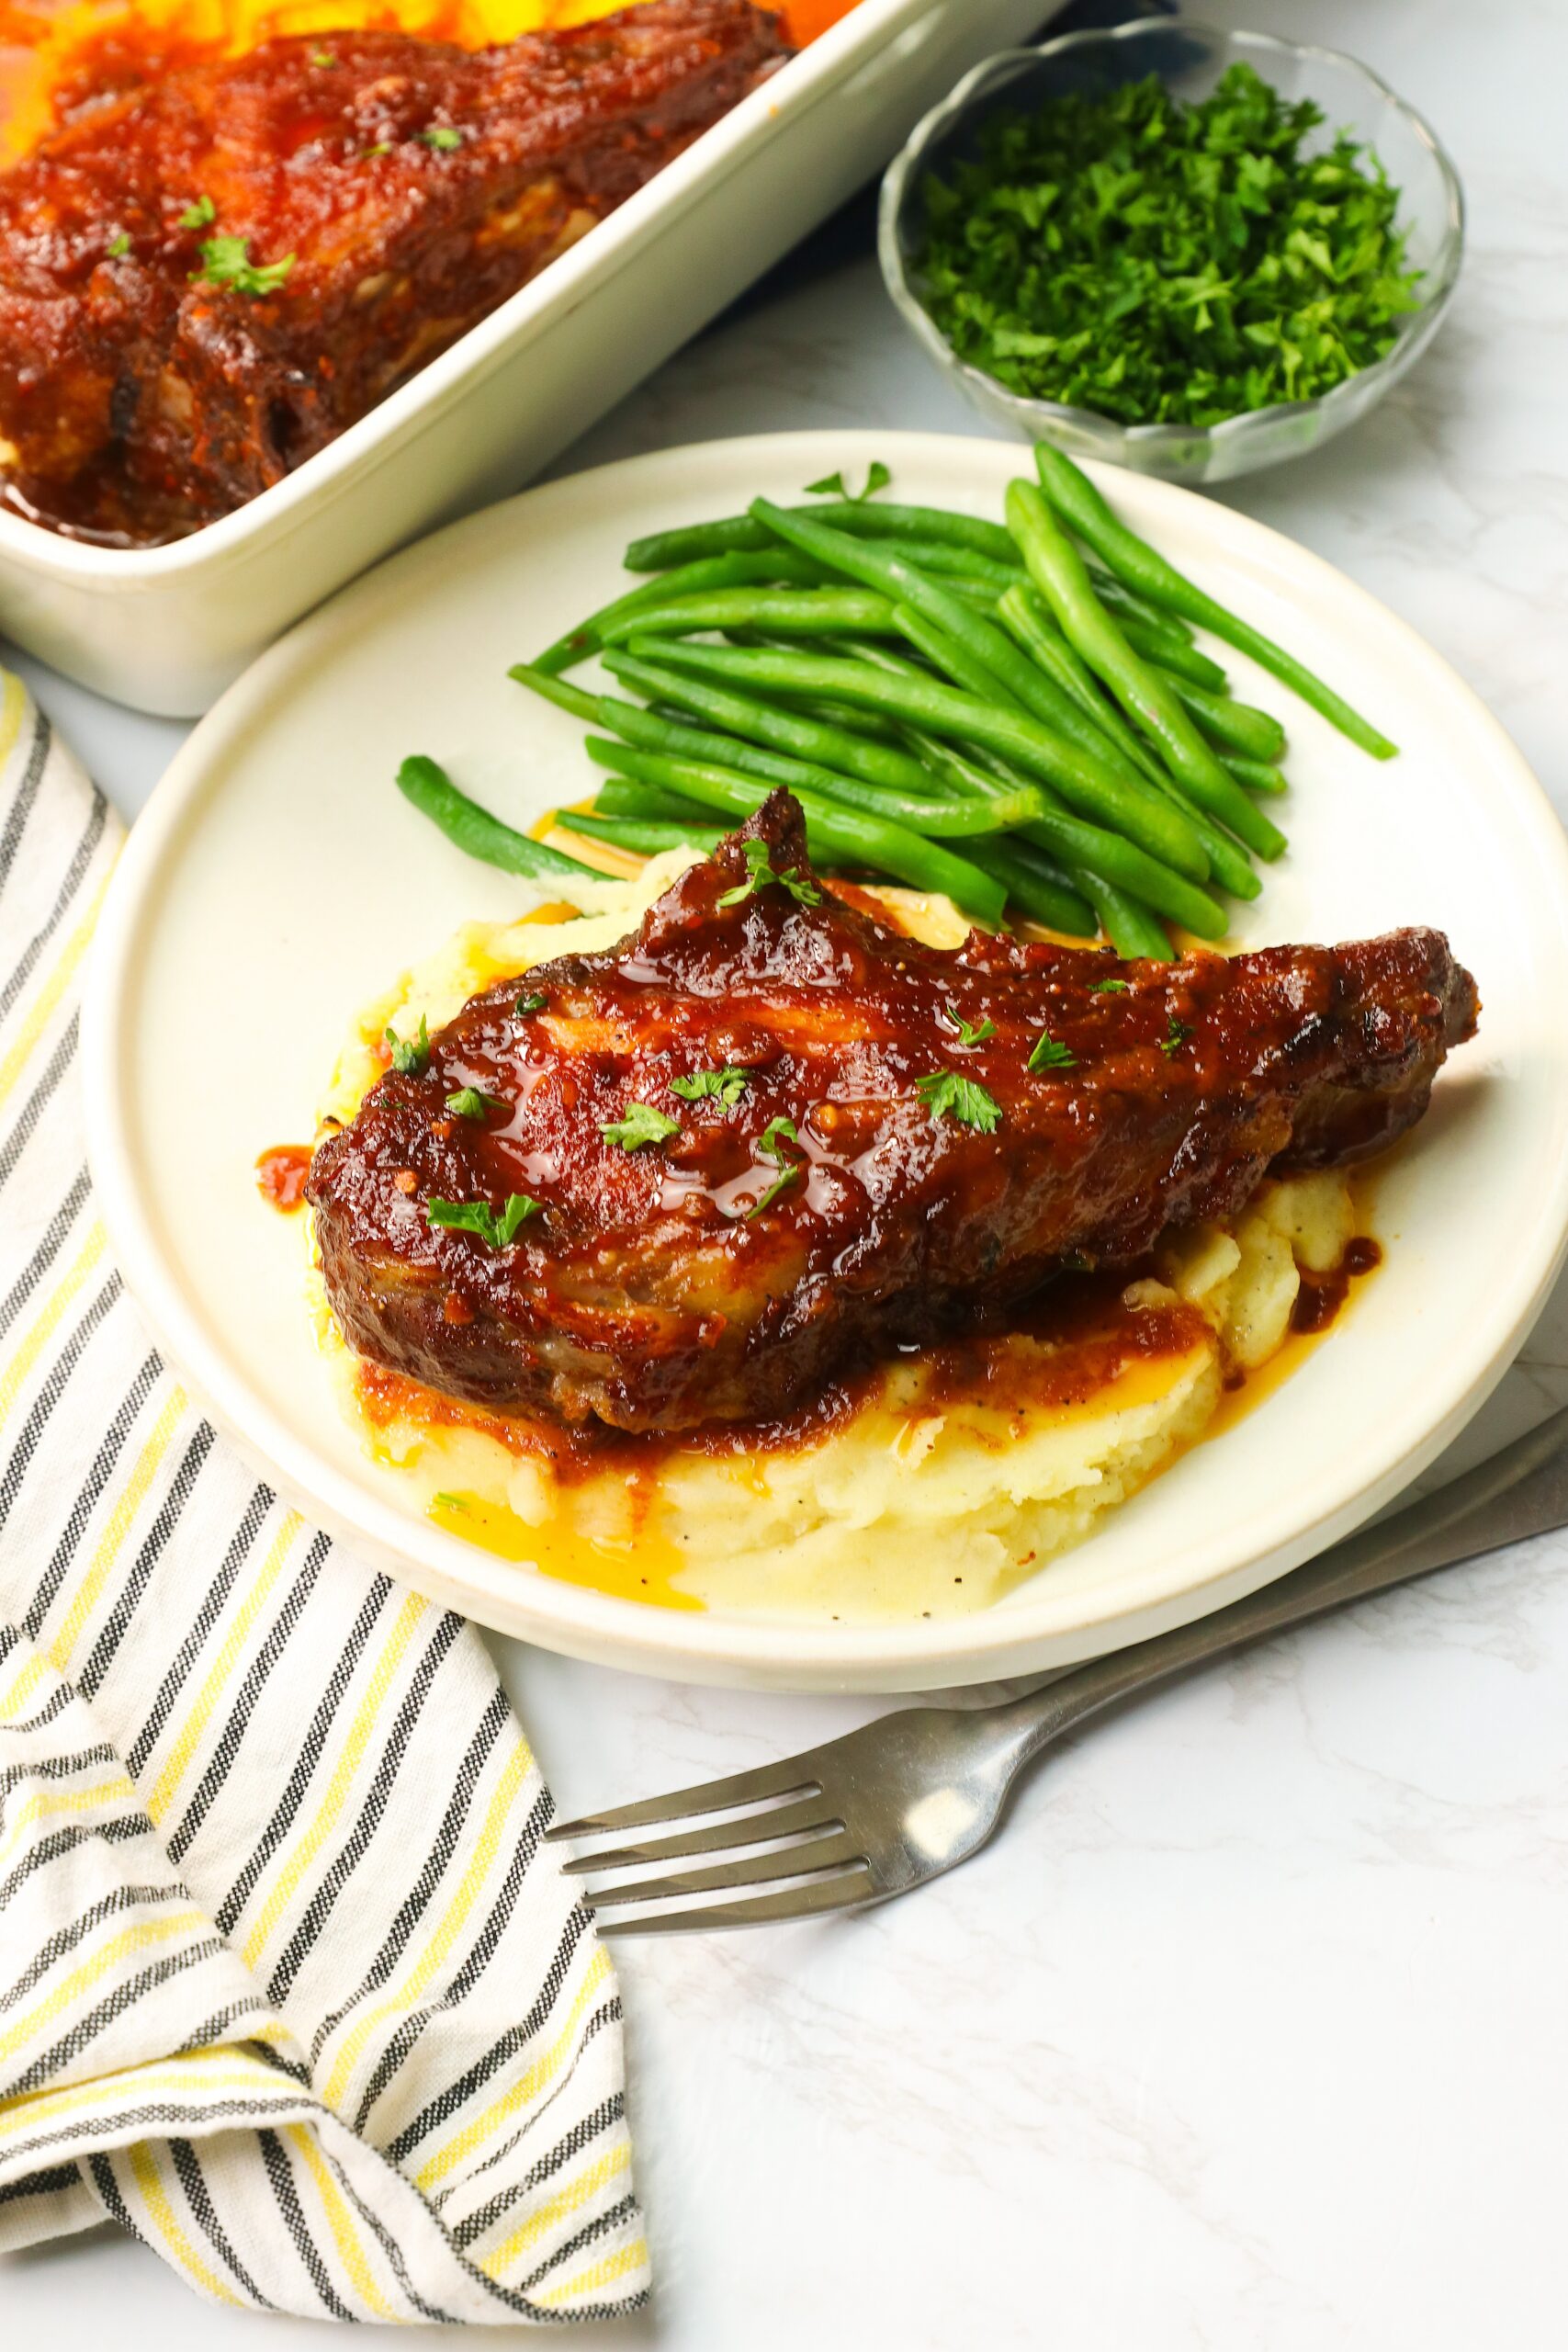 Comfort food Oven BBQ Pork Chops with mashed potatoes and roasted green beans